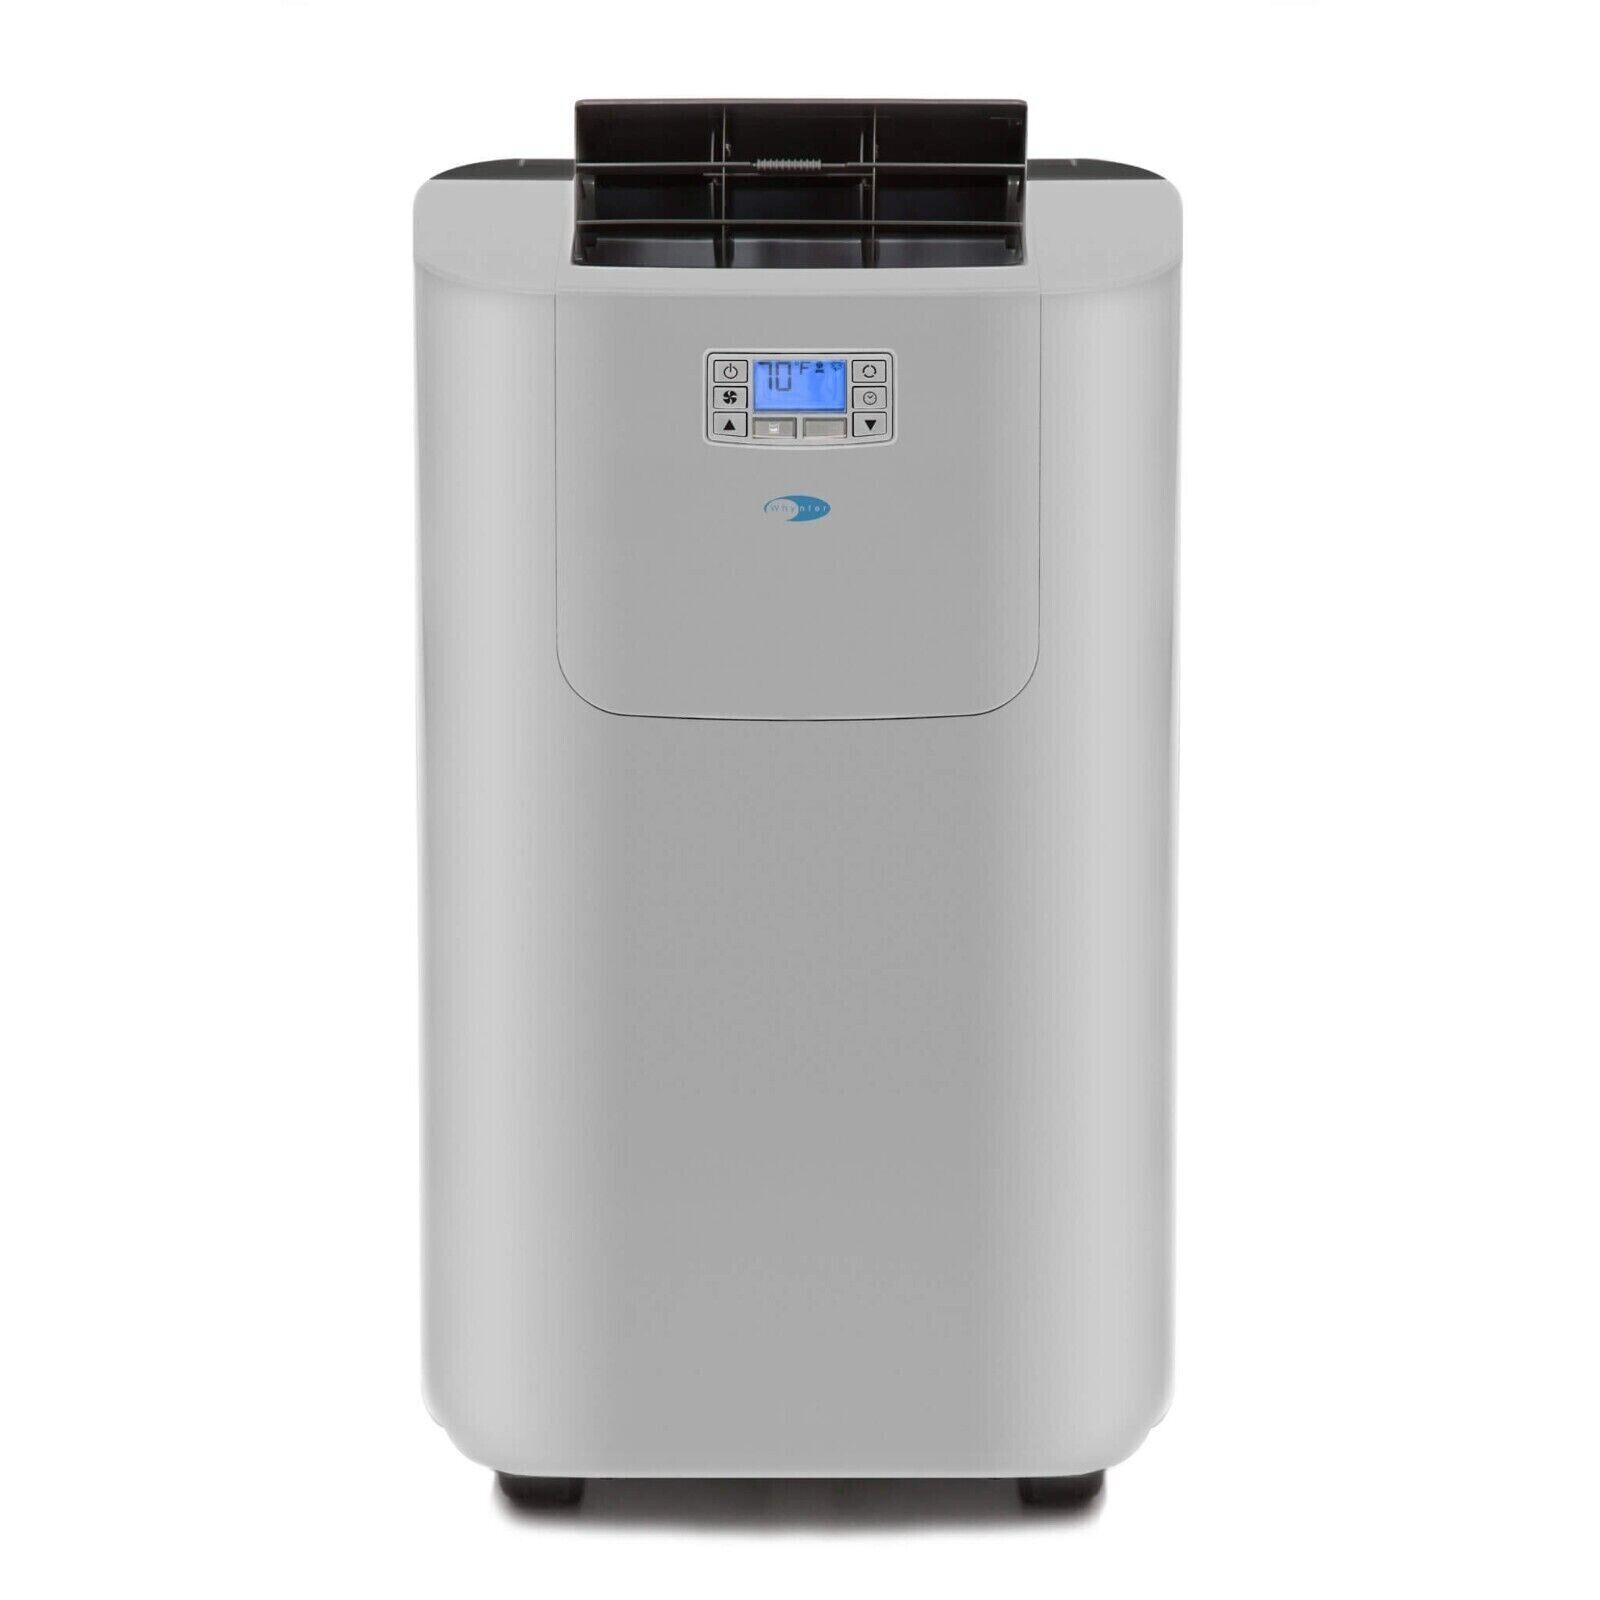 Whynter 7,000 BTU SACC Portable Air Conditioner Cools 400 Sq. Ft. ARC-122DS